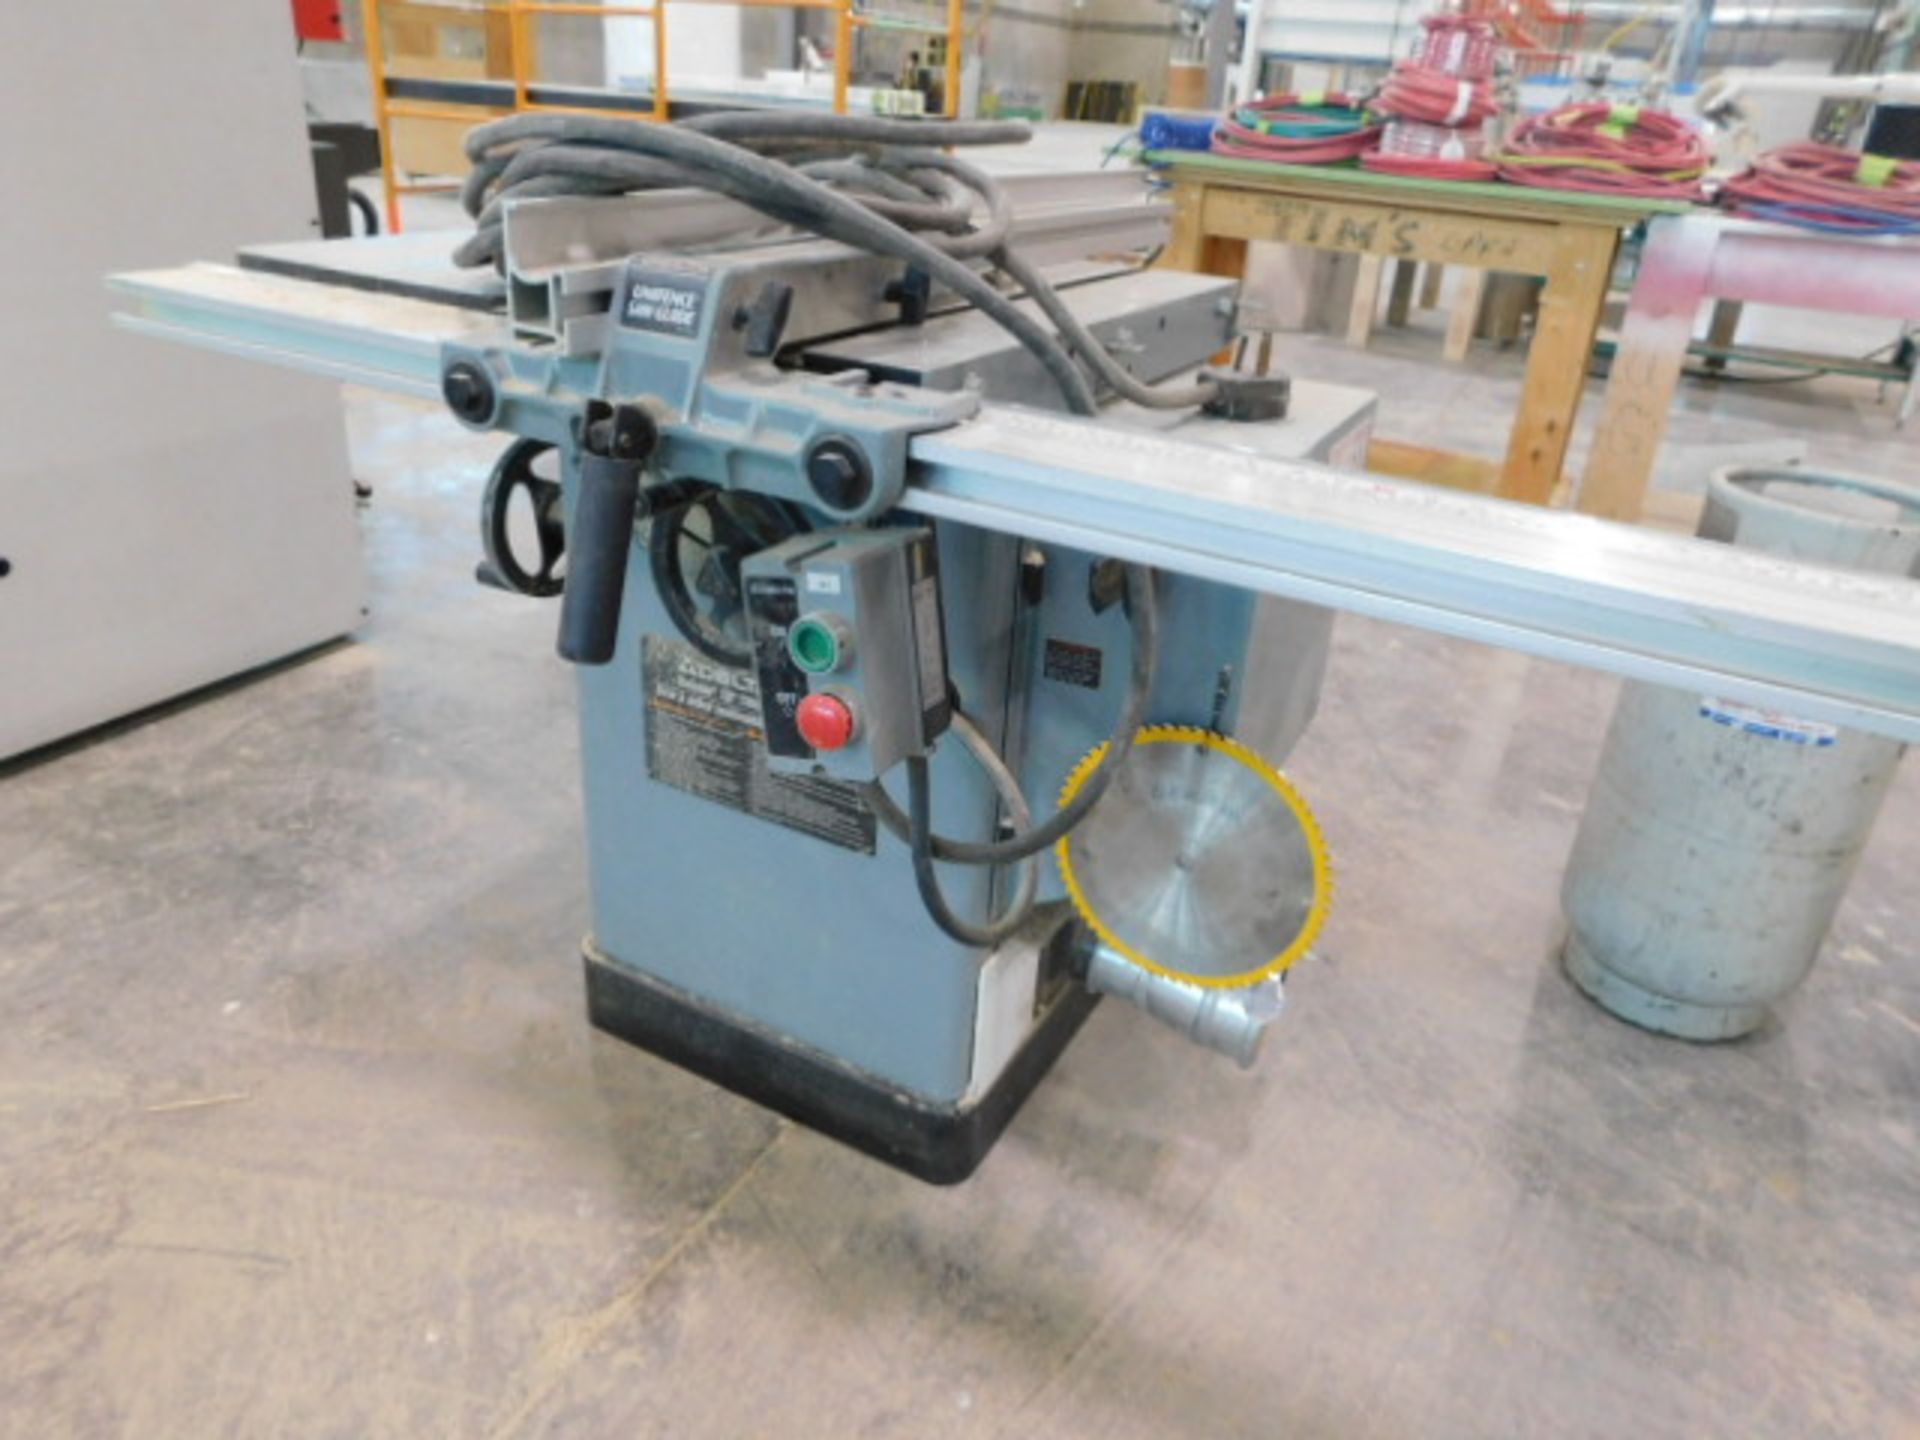 DELTA UNISAW 10” TABLE SAW, DELTA UNISAW FENCE